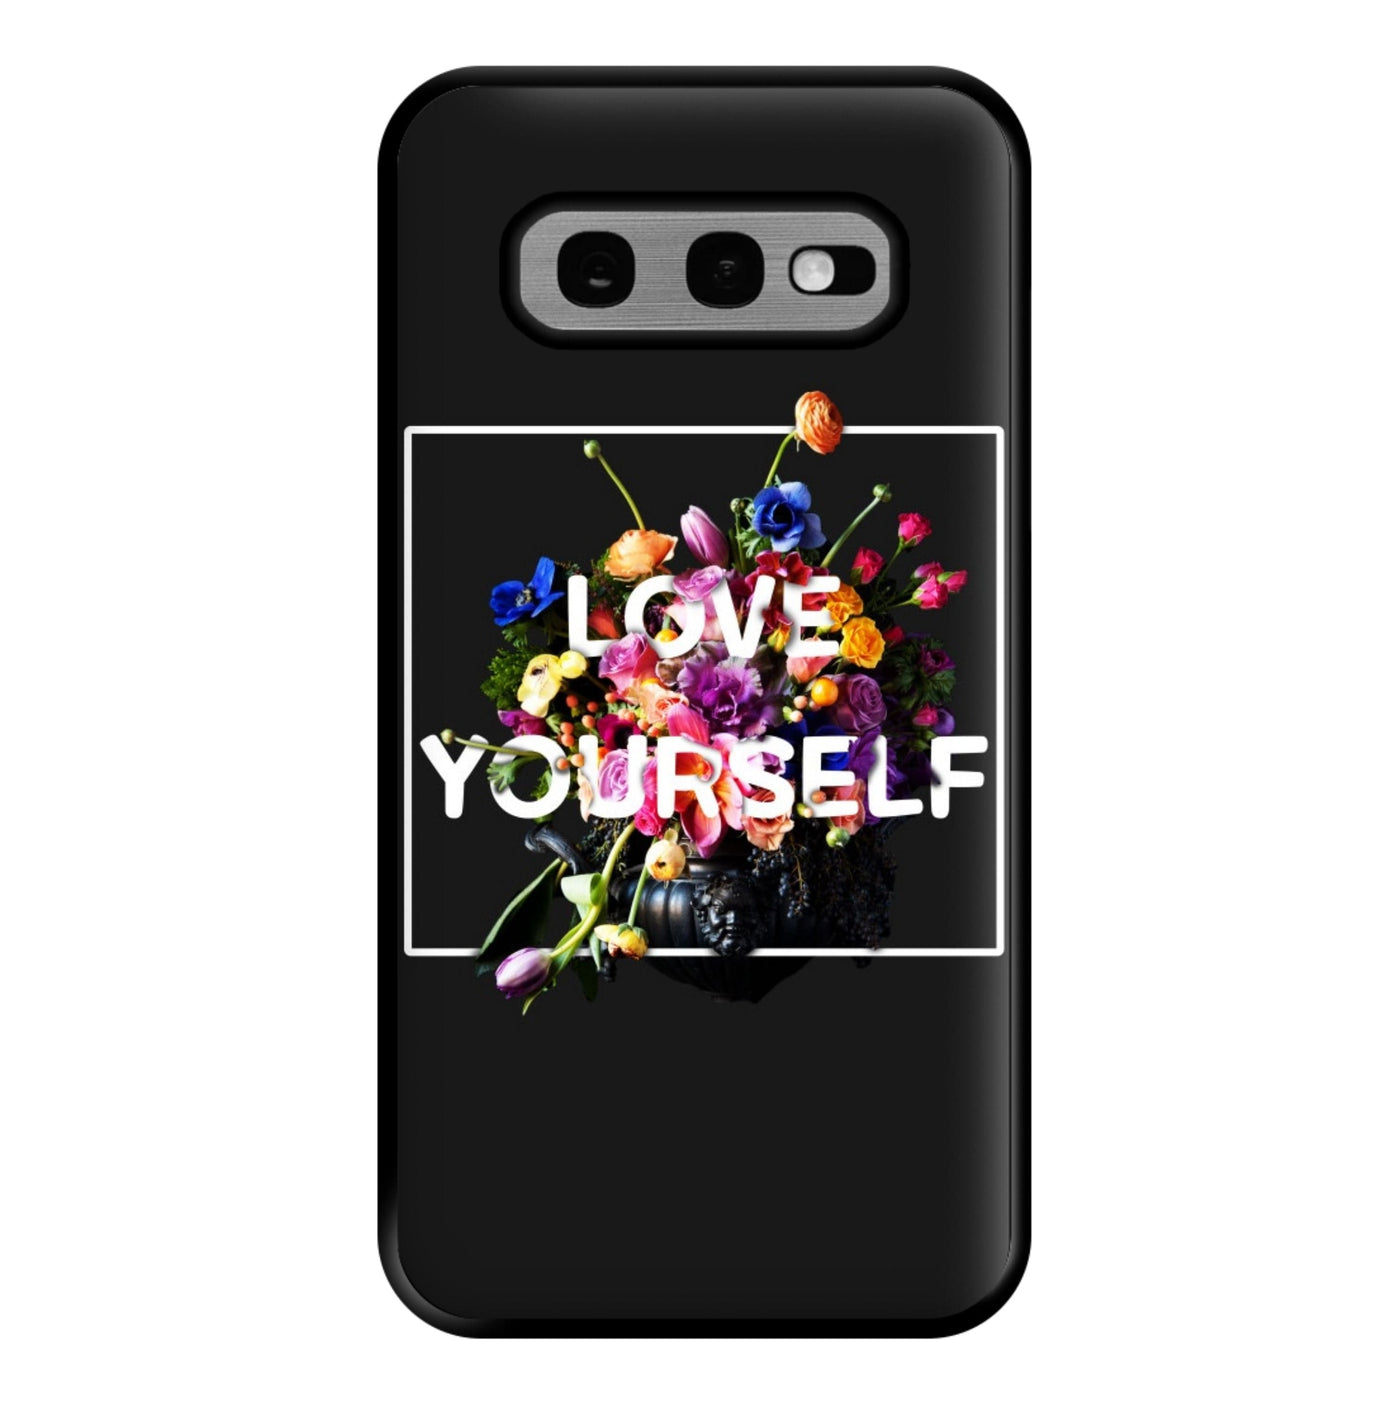 Floral Love Yourself - BTS Phone Case